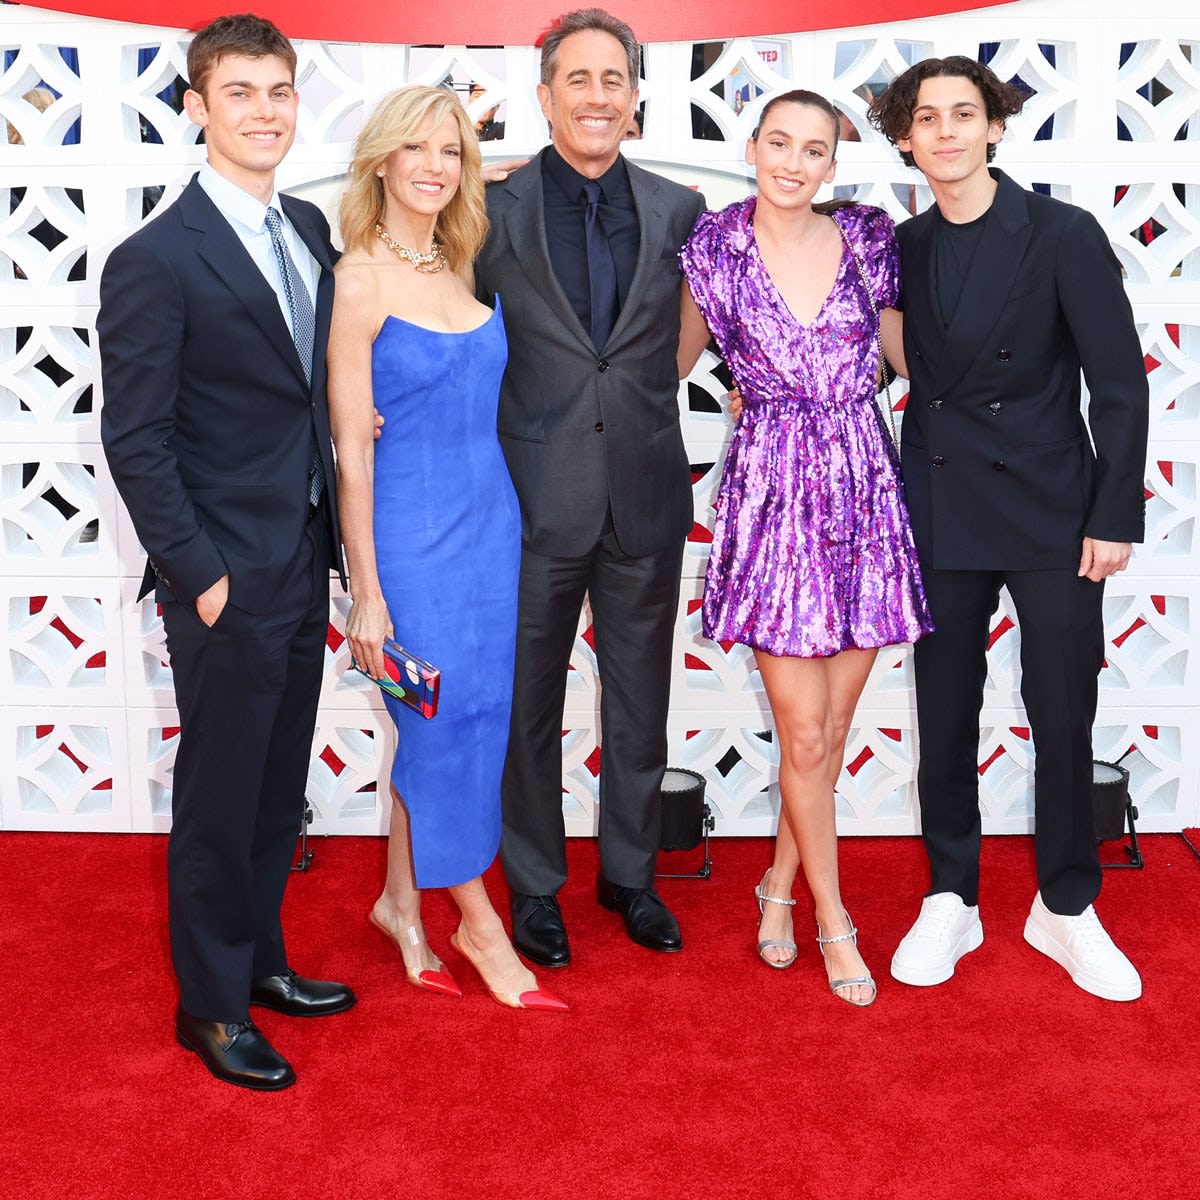 Jerry Seinfeld Shares His Kids' Honest Thoughts About His Career